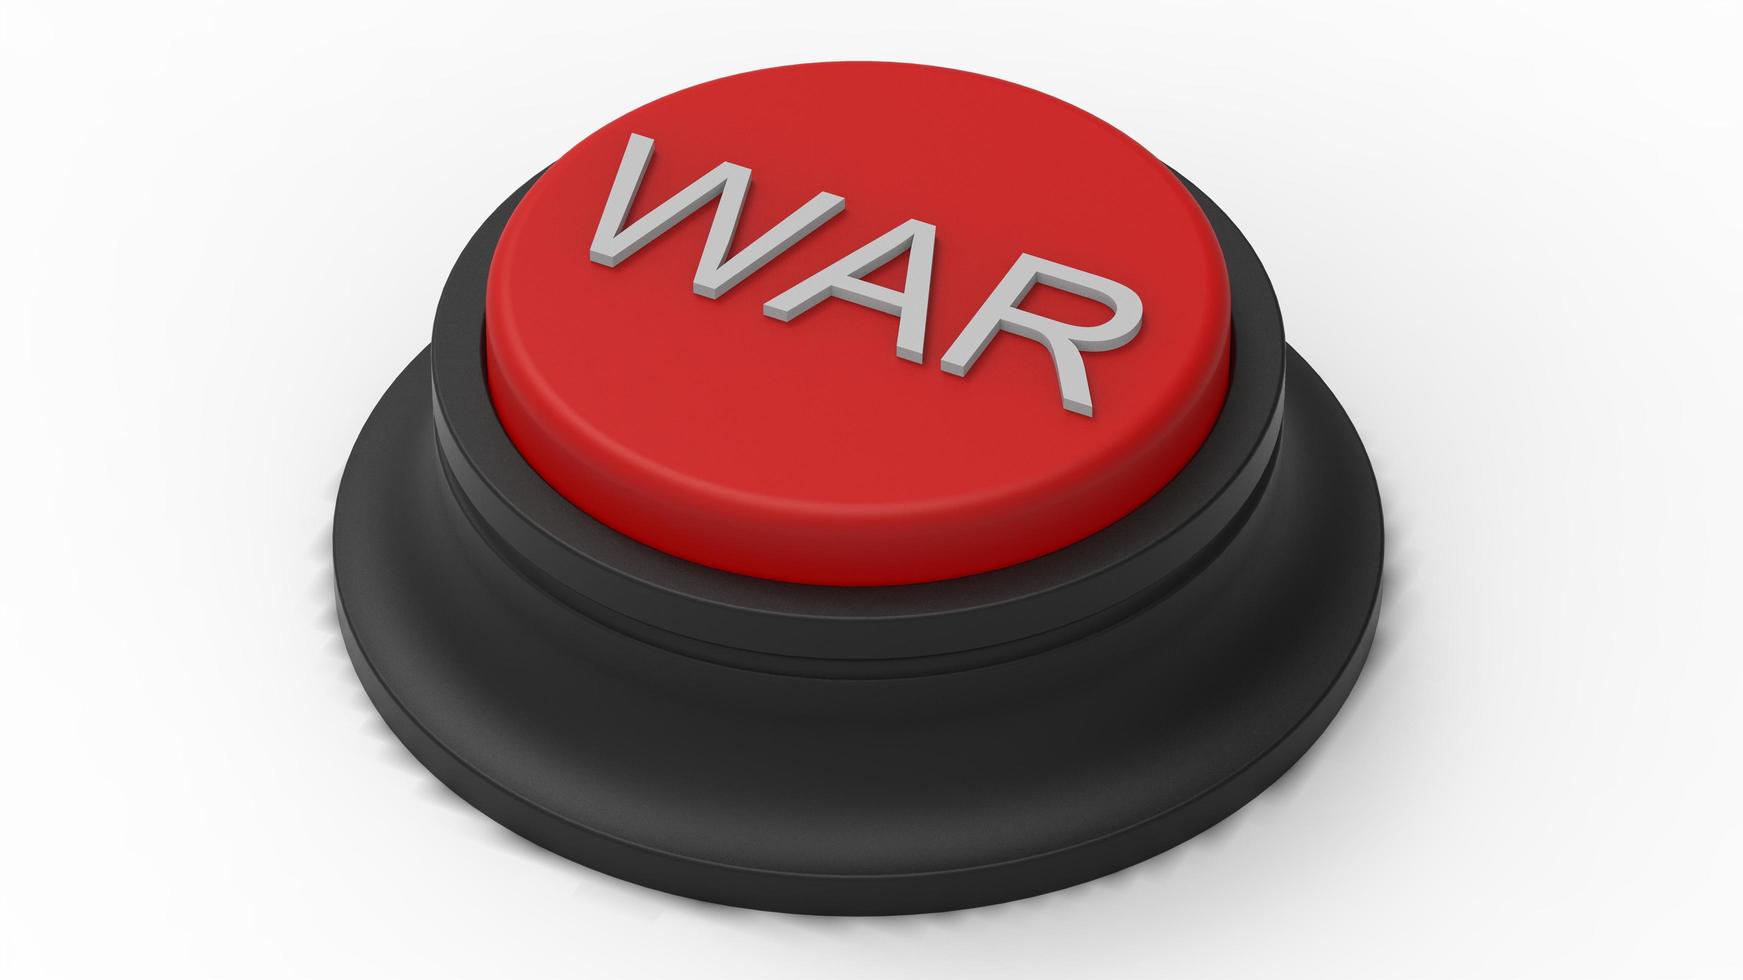 war red button isolated 3d illustration render photo